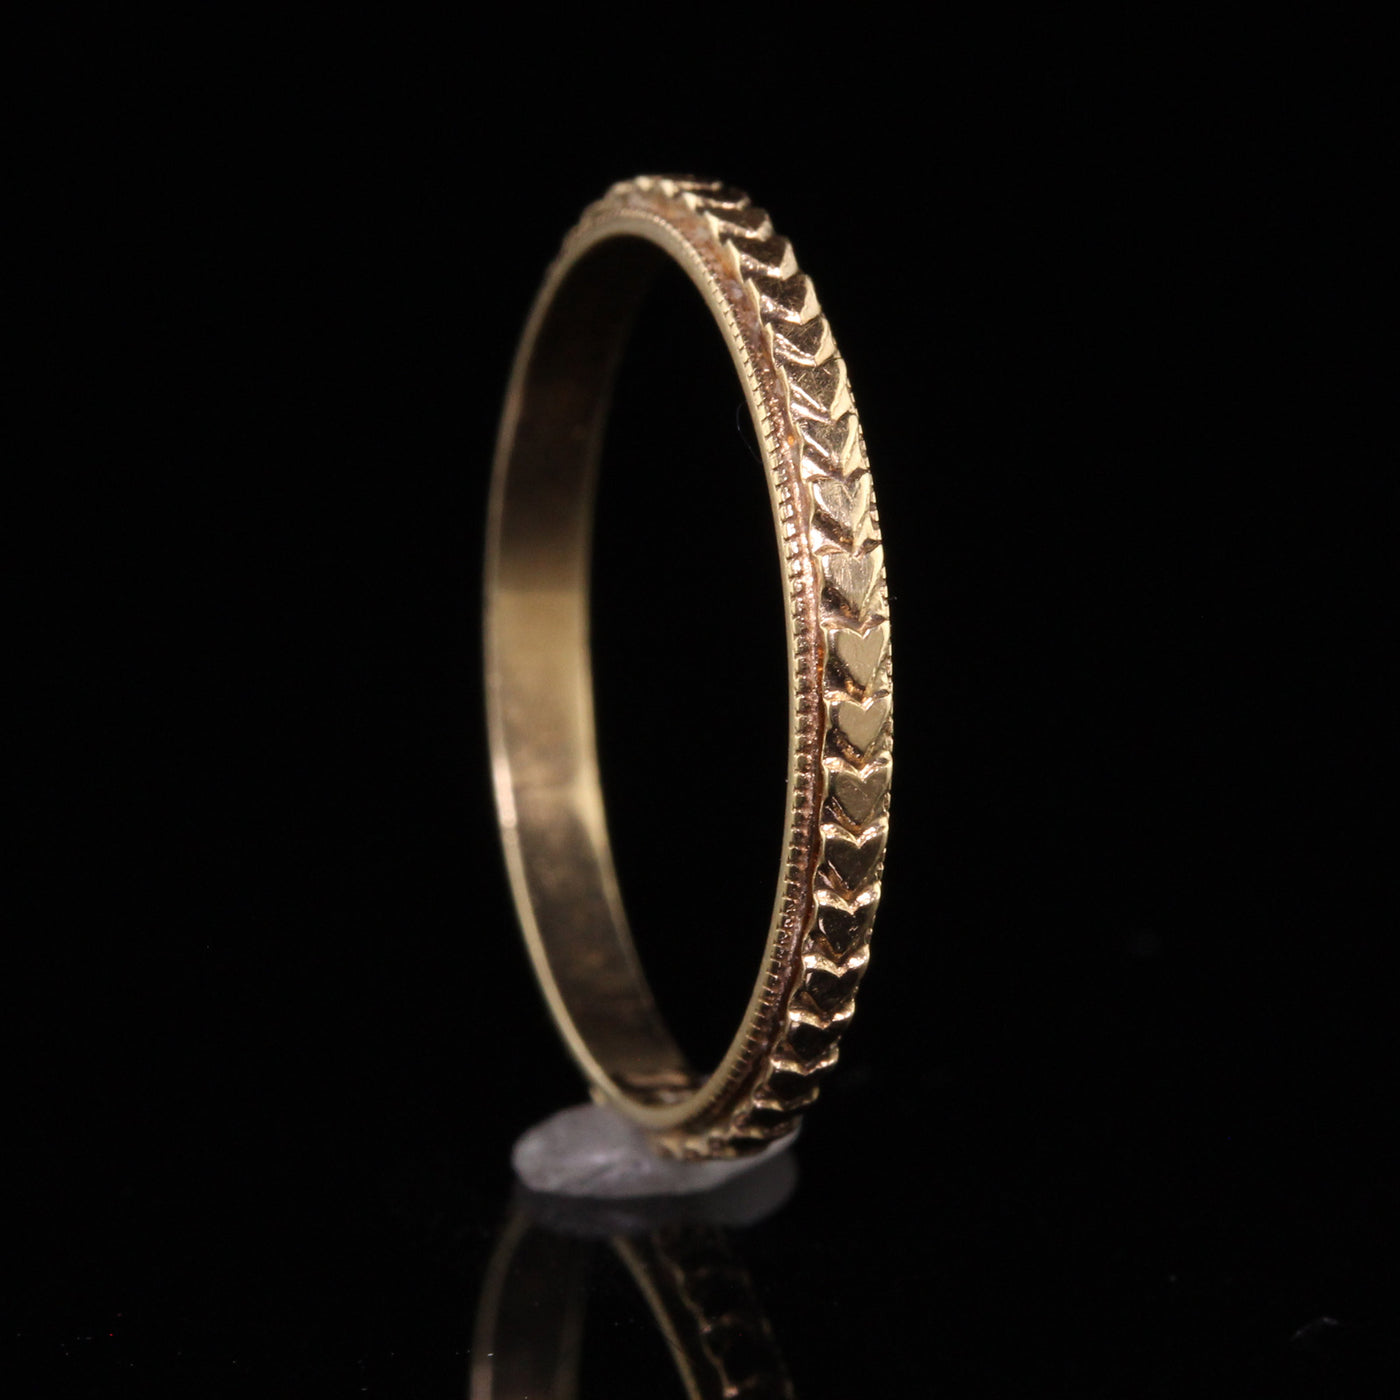 Antique Art Deco 14K Yellow Gold Heart Engraved Wedding Band - Size 7